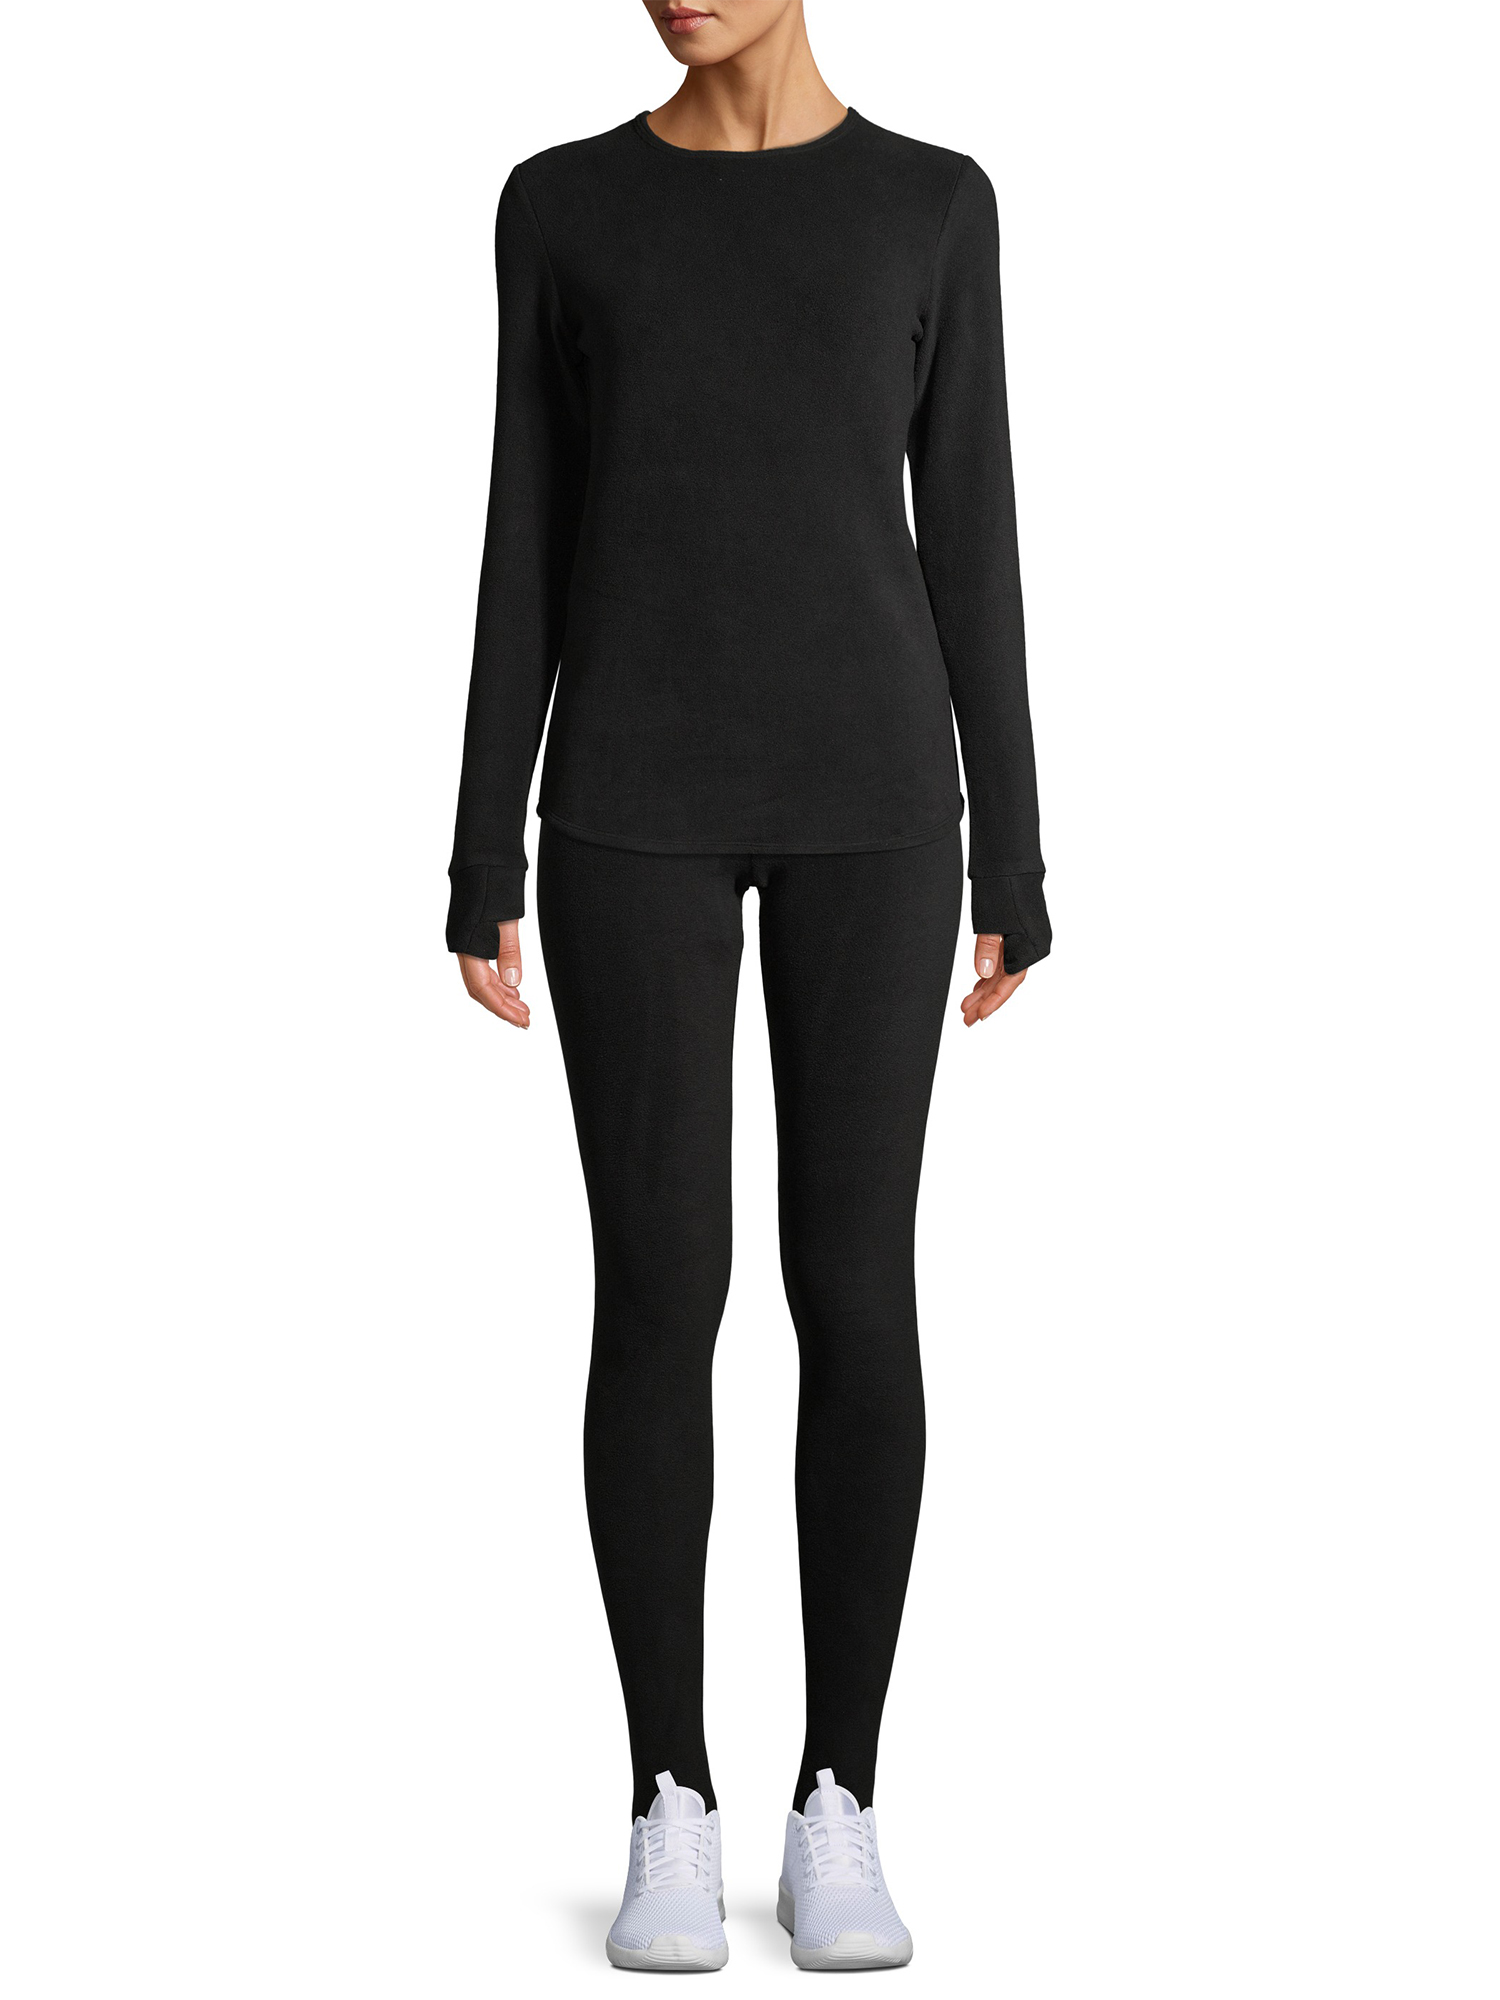 ClimateRight by Cuddl Duds Women's Stretch Fleece Base Layer High Waisted Thermal Leggings - image 2 of 6